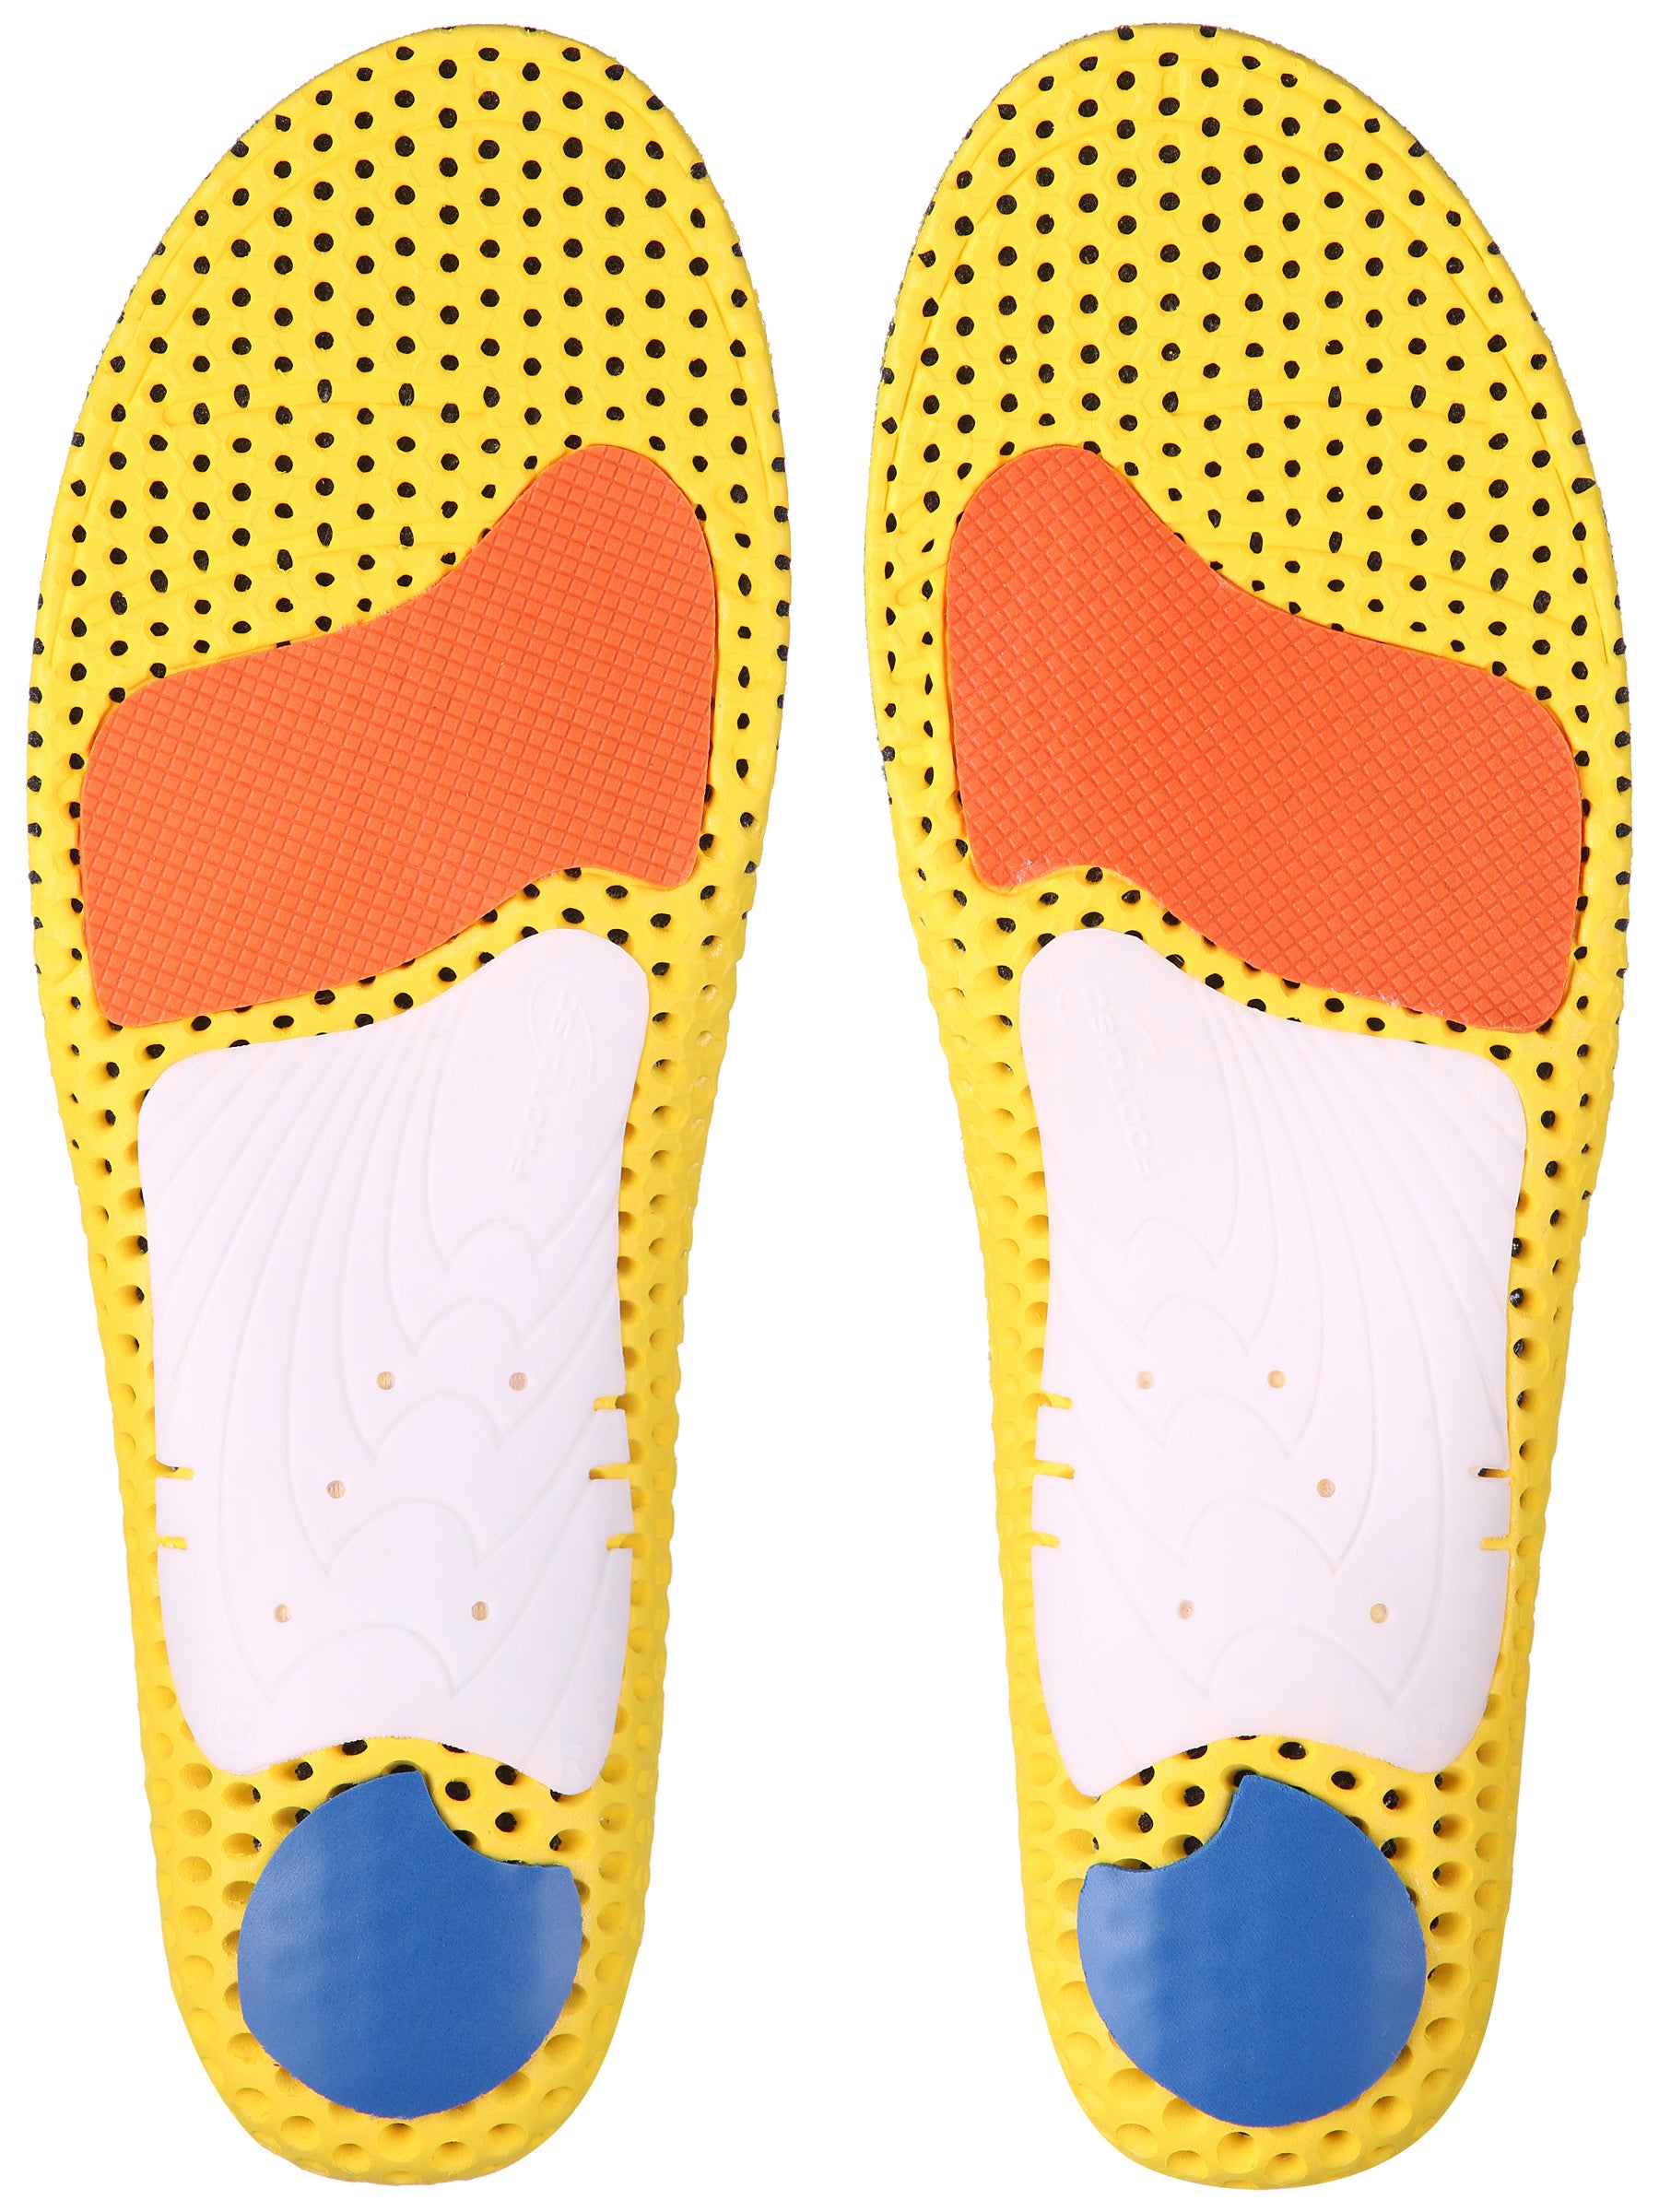 low currexSole currex RUNPRO running shoe insoles medium and high arch profiles sports running jogging 